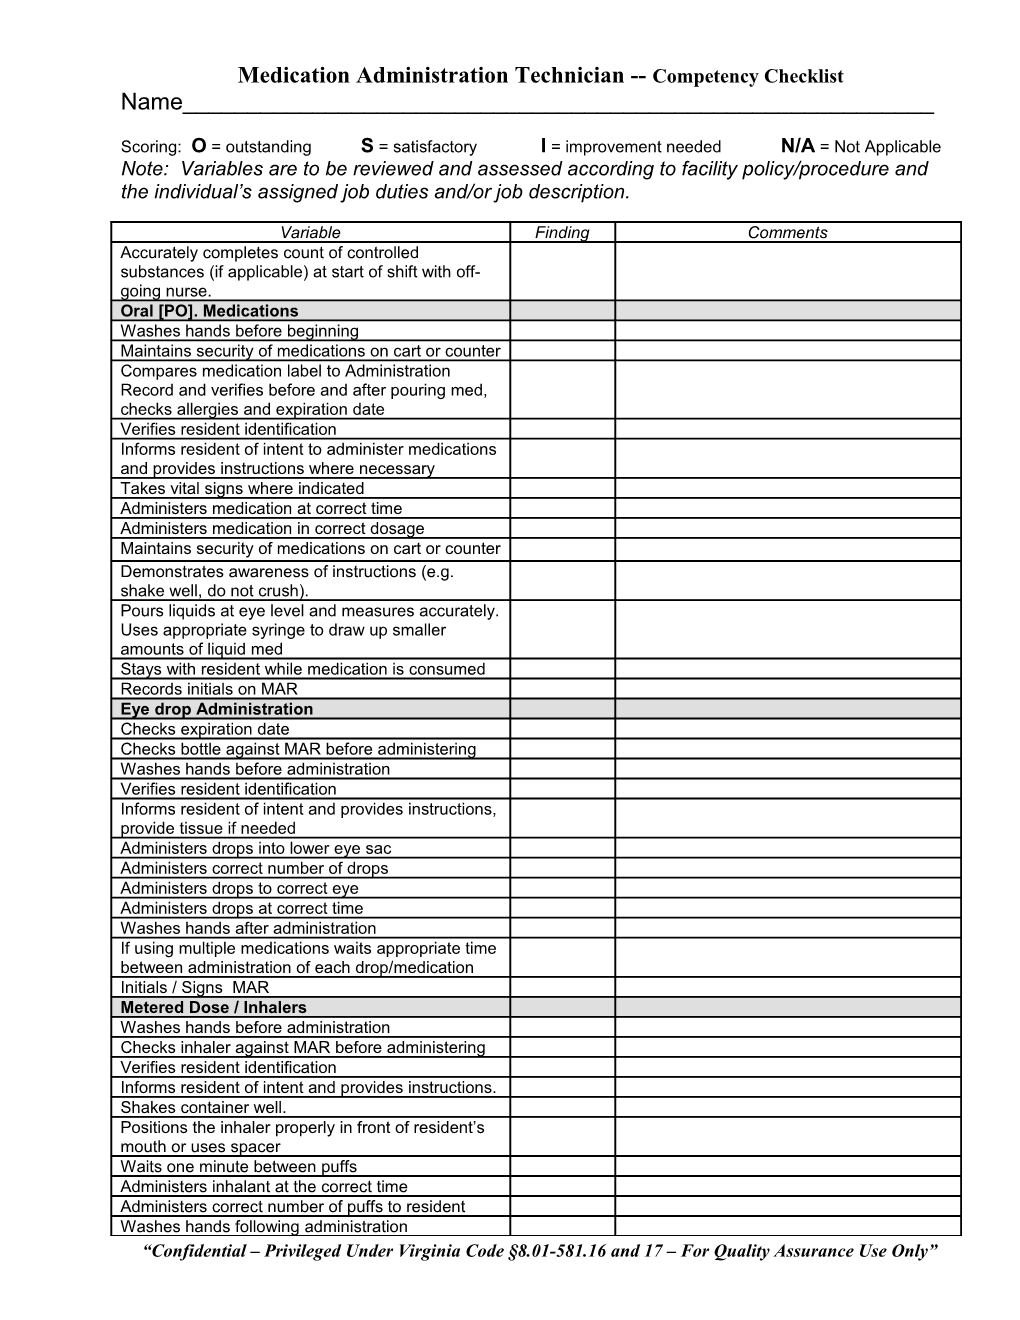 Medication Administration Technician Competency Checklist